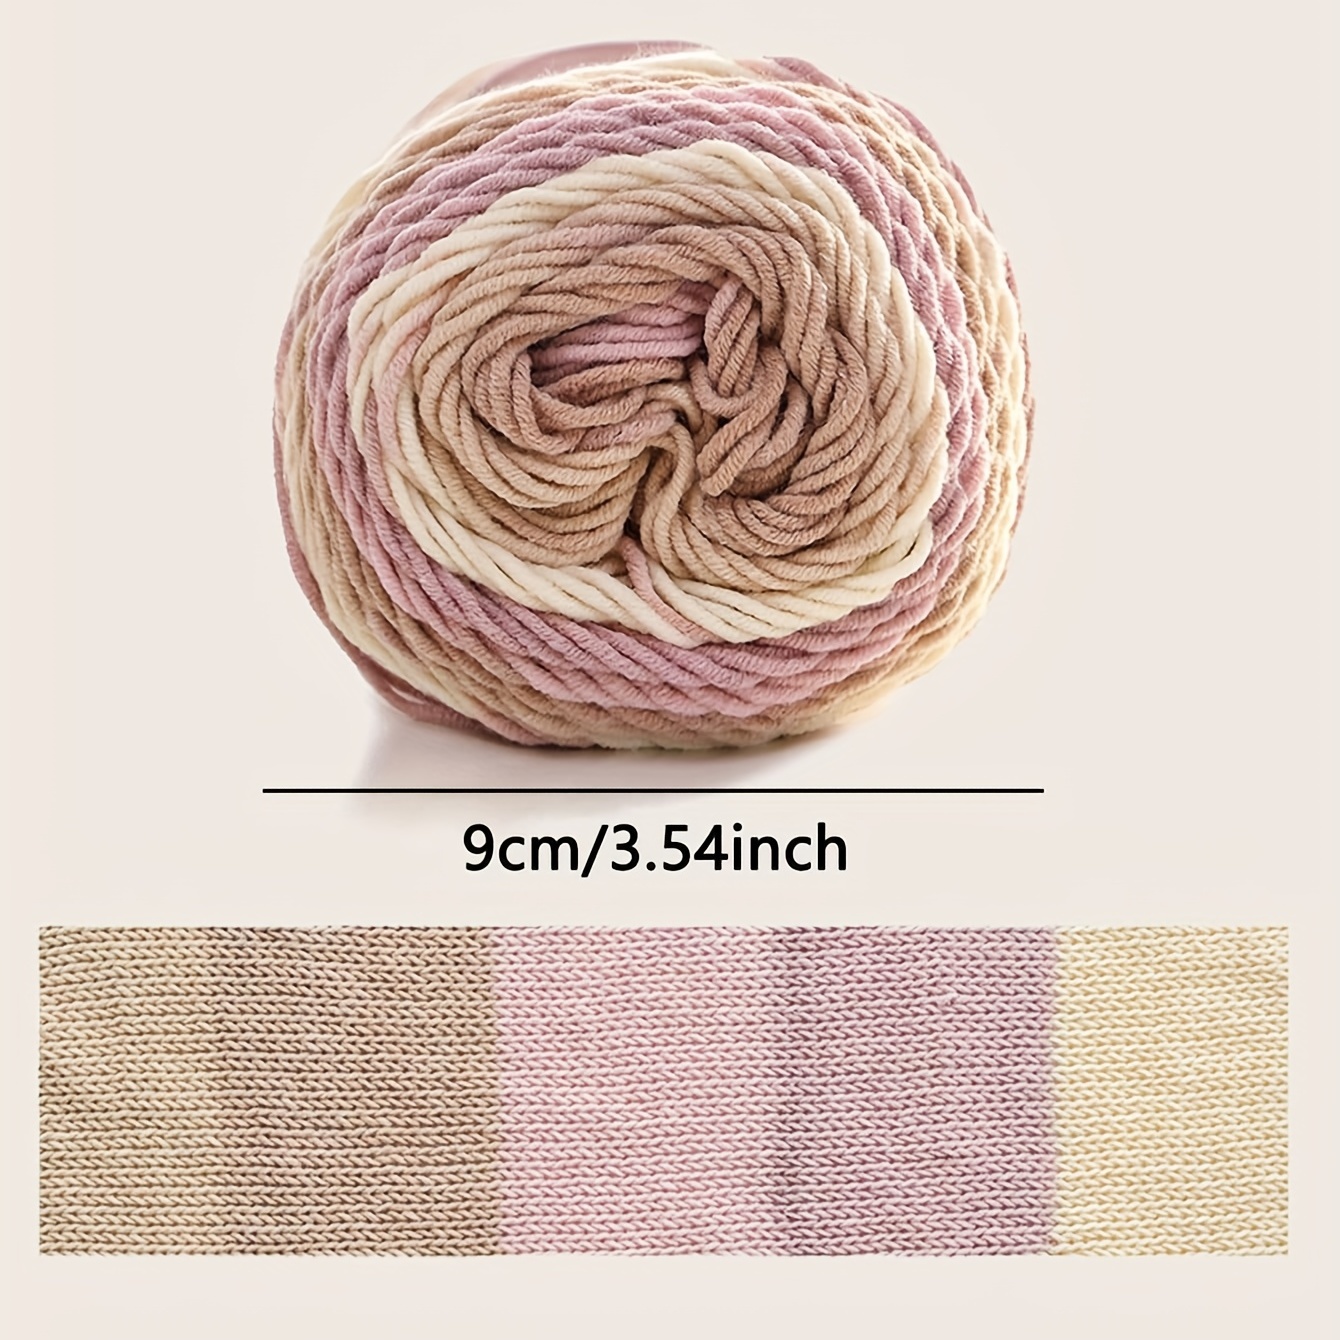 2mm Rainbow Yarn Crochet DIY Cord Braided Rope Soft Handmade Craft Knitting  Yarn Polyester Rope for Office Pillow Bag Scarf Sweater A